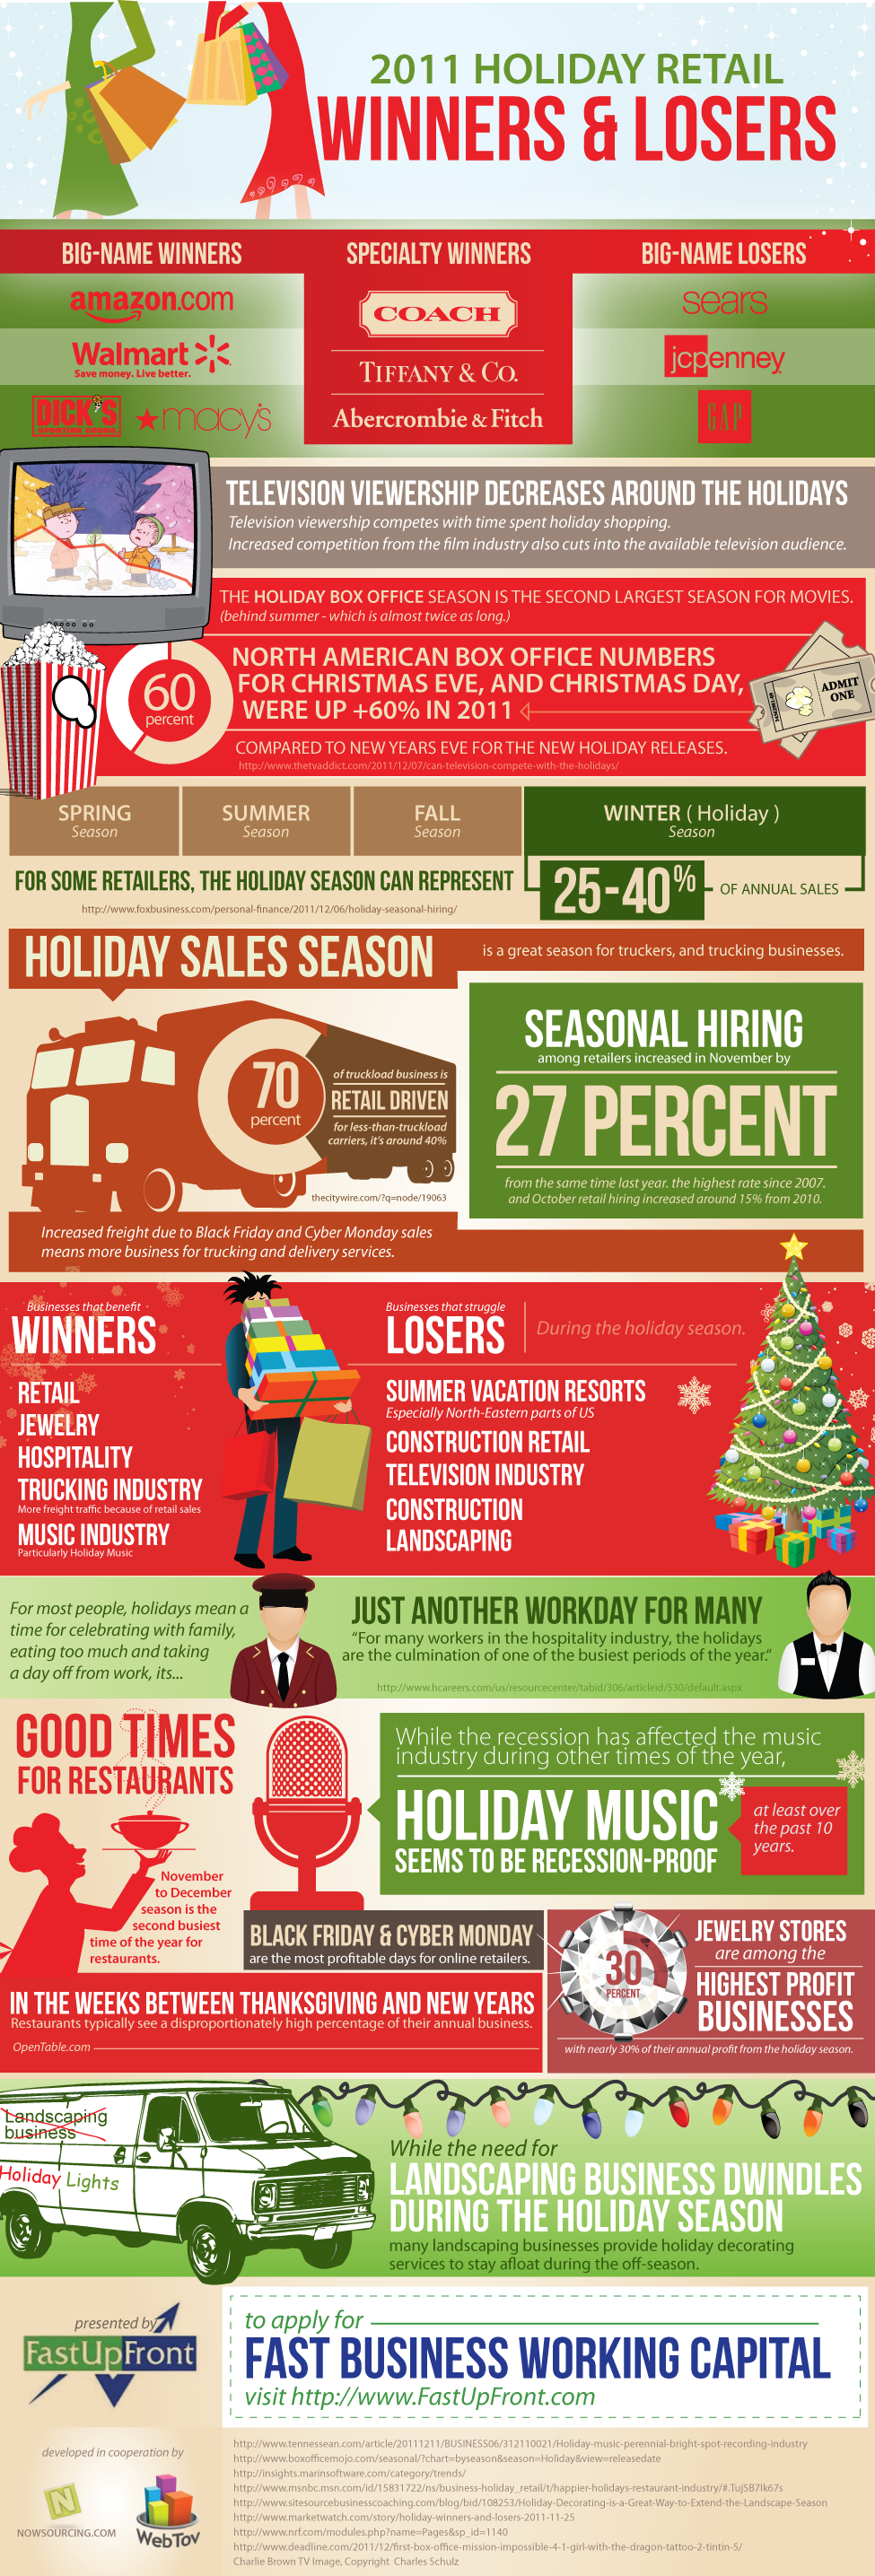 Retail Holiday Winners & Losers [ infographic ]